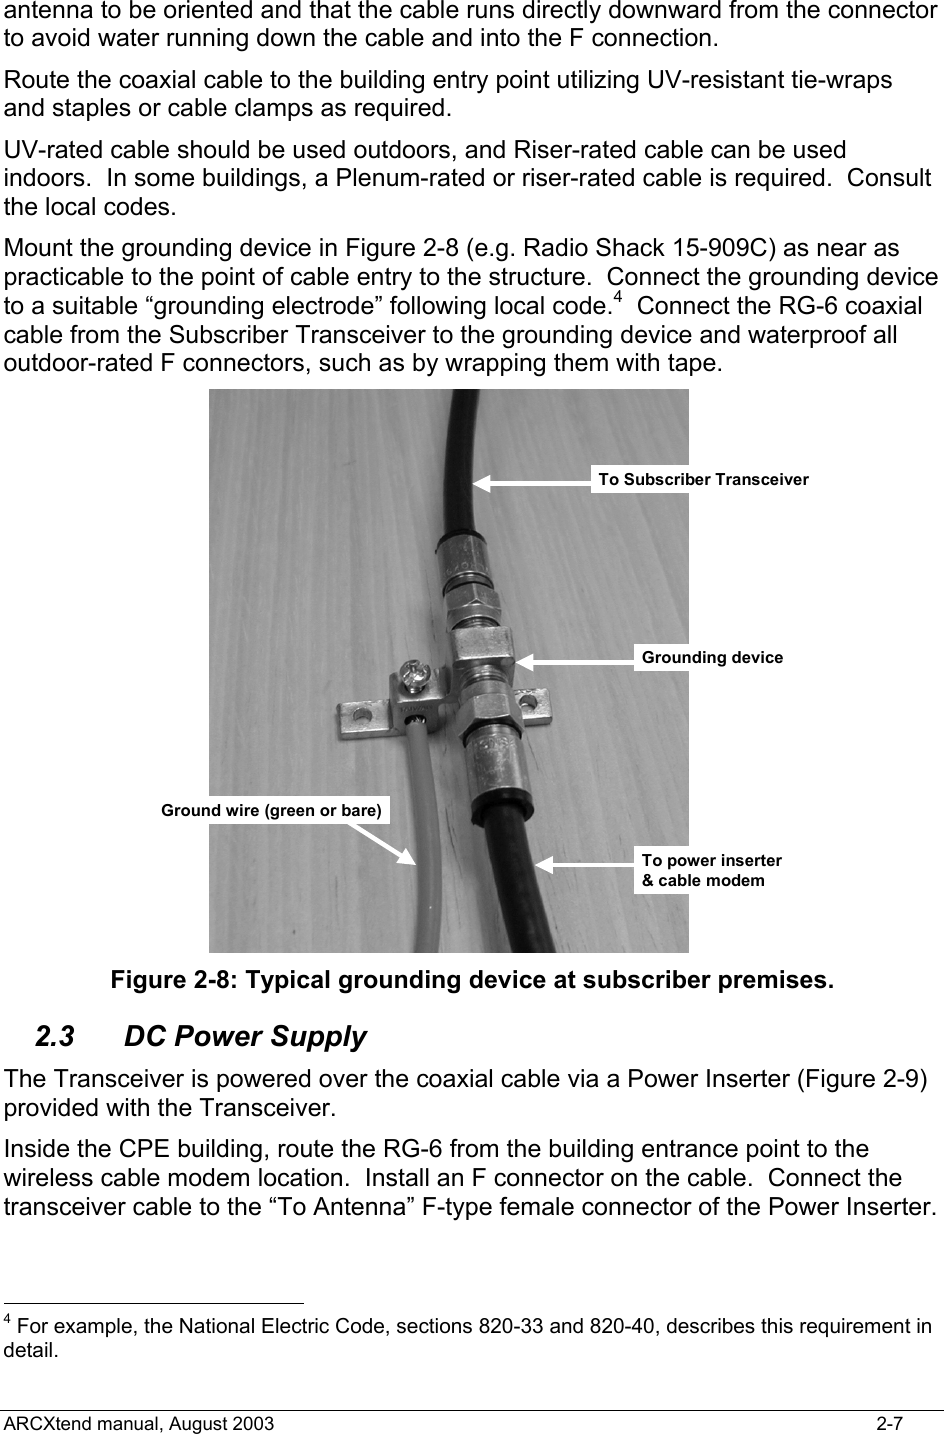  antenna to be oriented and that the cable runs directly downward from the connector to avoid water running down the cable and into the F connection.  Route the coaxial cable to the building entry point utilizing UV-resistant tie-wraps and staples or cable clamps as required.   UV-rated cable should be used outdoors, and Riser-rated cable can be used indoors.  In some buildings, a Plenum-rated or riser-rated cable is required.  Consult the local codes. Mount the grounding device in Figure 2-8 (e.g. Radio Shack 15-909C) as near as practicable to the point of cable entry to the structure.  Connect the grounding device to a suitable “grounding electrode” following local code.4  Connect the RG-6 coaxial cable from the Subscriber Transceiver to the grounding device and waterproof all outdoor-rated F connectors, such as by wrapping them with tape.   To Subscriber TransceiverGrounding deviceGround wire (green or bare)To power inserter&amp; cable modem Figure 2-8: Typical grounding device at subscriber premises. 2.3  DC Power Supply The Transceiver is powered over the coaxial cable via a Power Inserter (Figure 2-9) provided with the Transceiver. Inside the CPE building, route the RG-6 from the building entrance point to the wireless cable modem location.  Install an F connector on the cable.  Connect the transceiver cable to the “To Antenna” F-type female connector of the Power Inserter.                                               4 For example, the National Electric Code, sections 820-33 and 820-40, describes this requirement in detail. ARCXtend manual, August 2003    2-7 